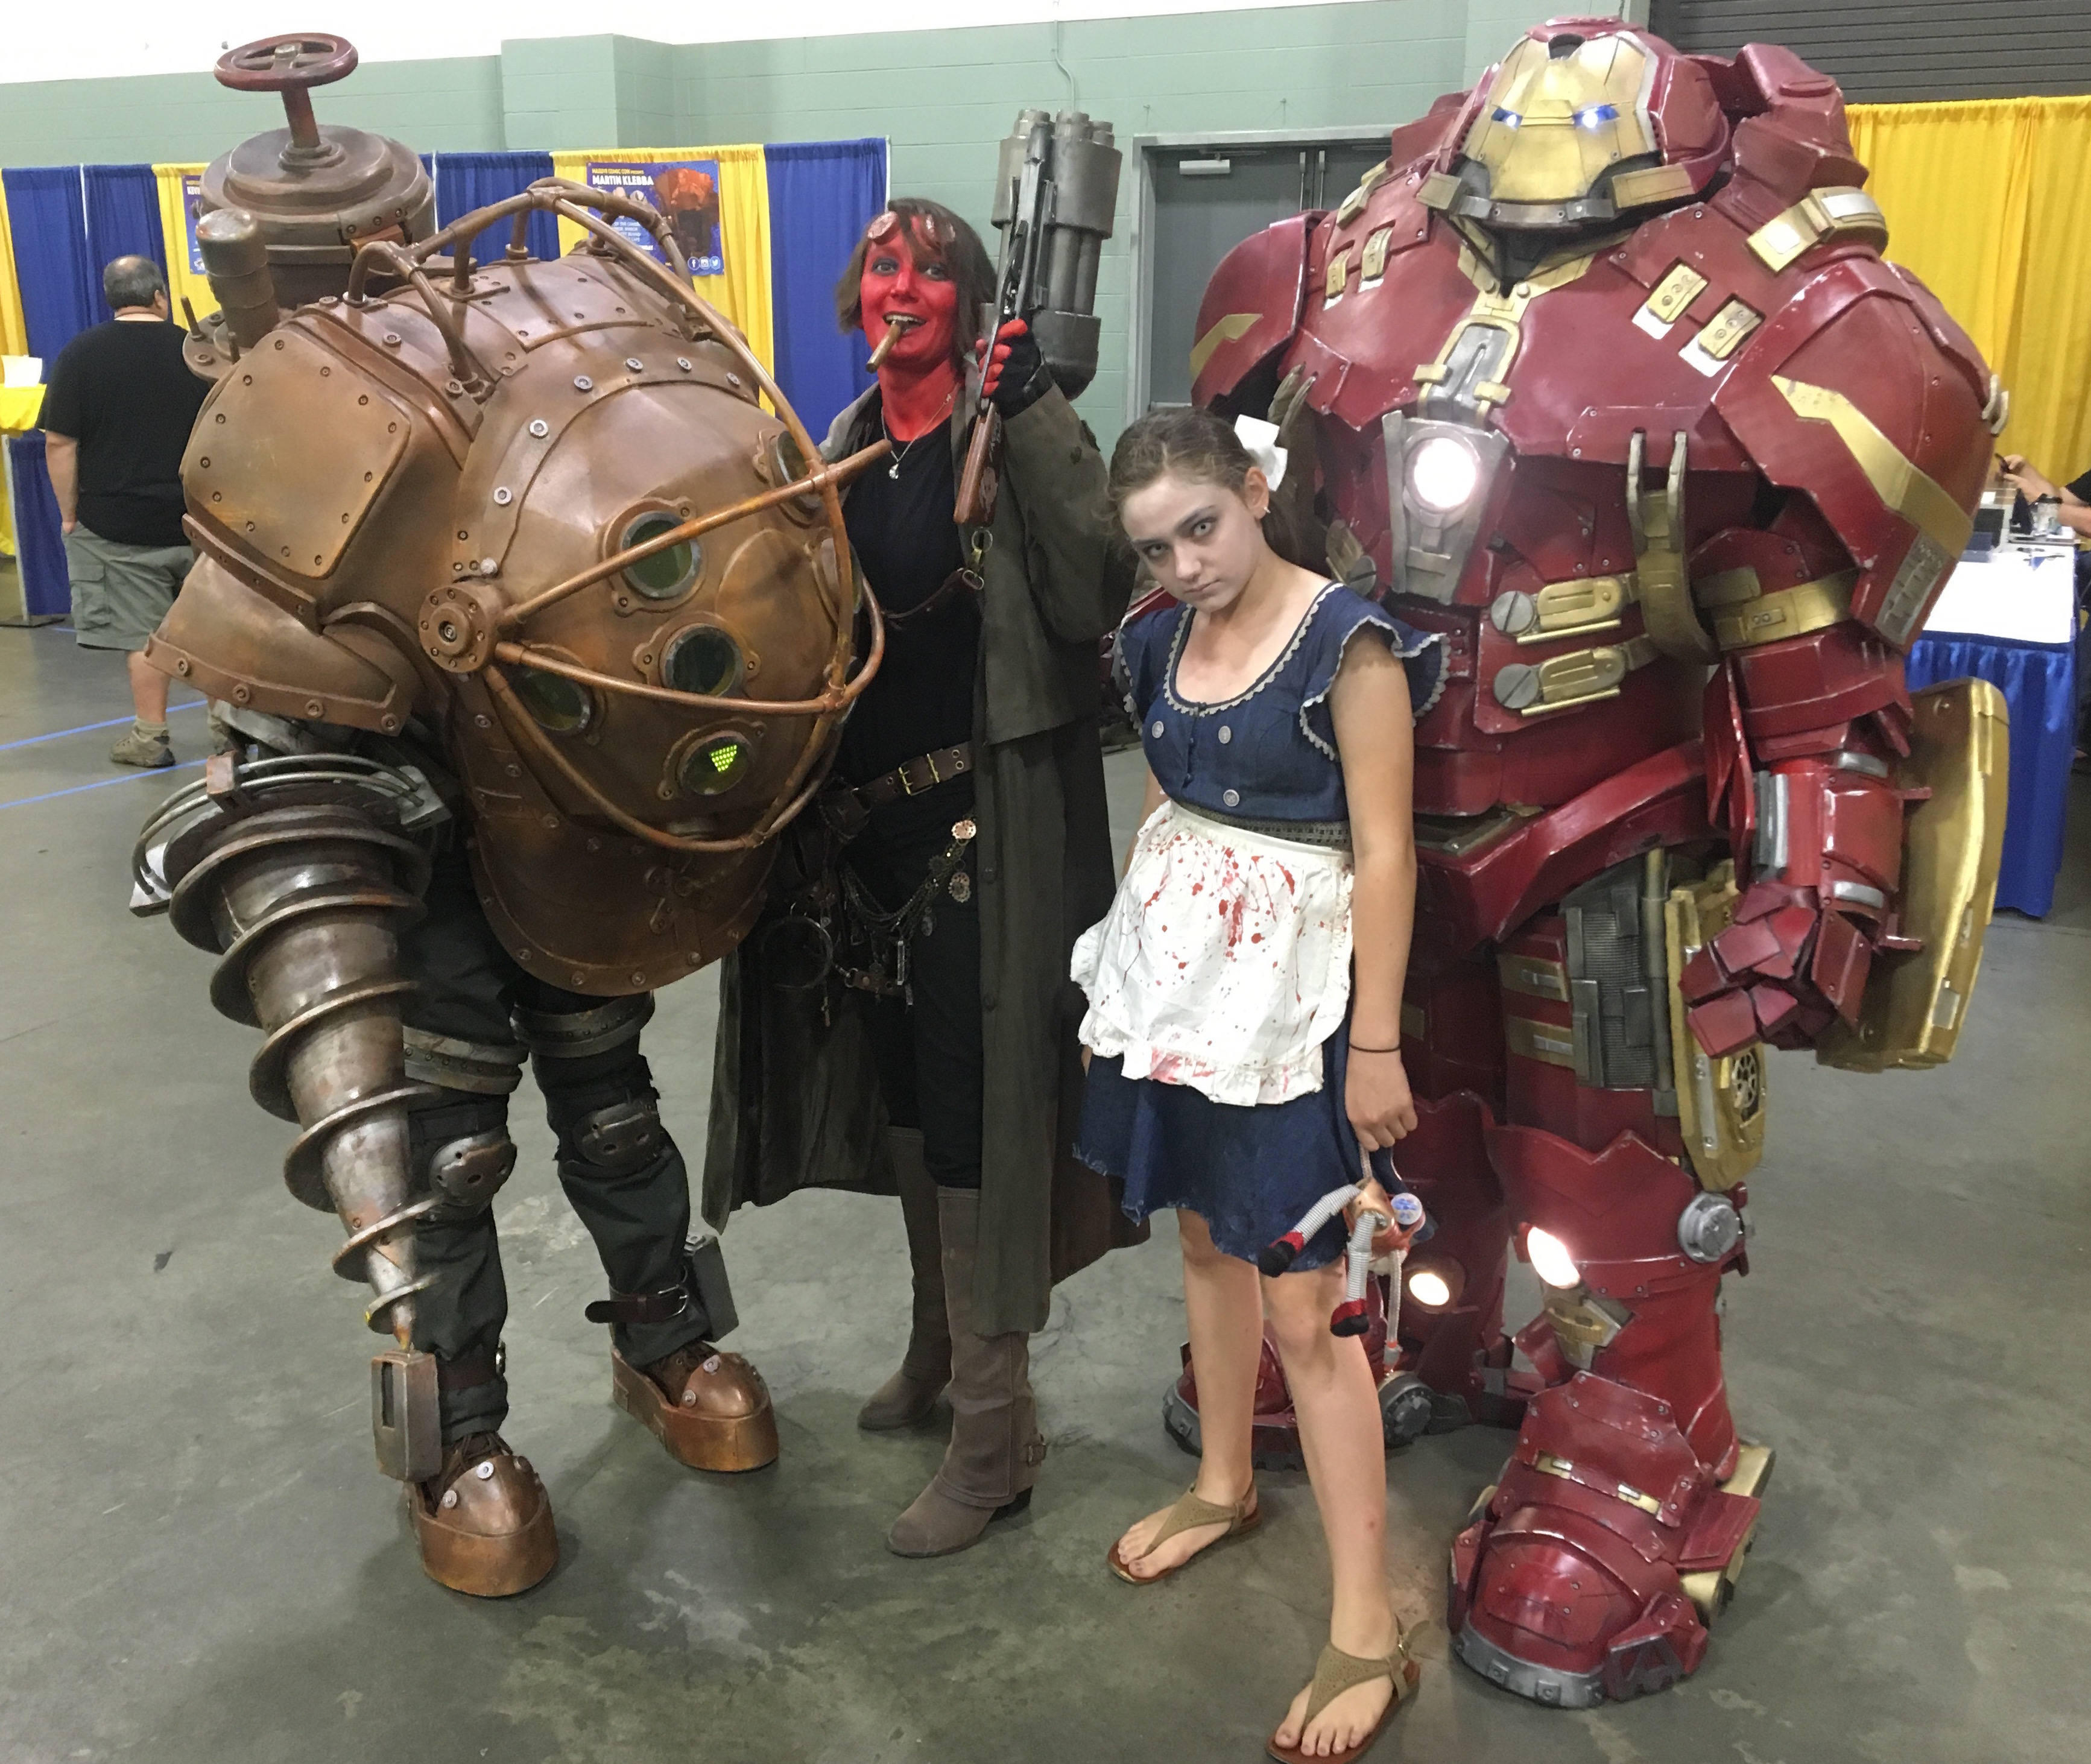 [MASSive Comic Con] Pokémon and super heroes and cosplayers, oh my!